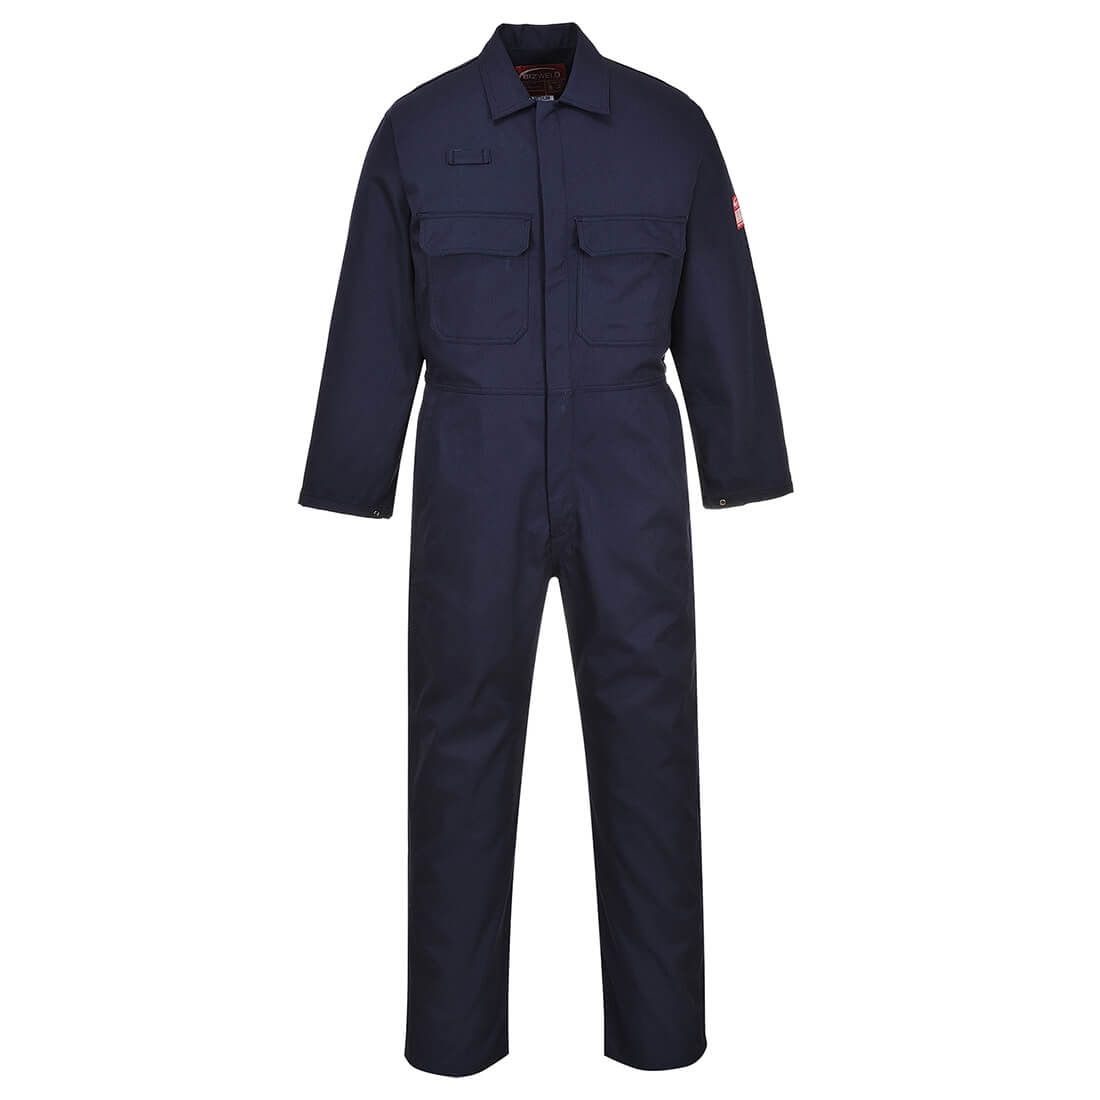 Image of Biz Weld Mens Flame Resistant Overall Navy Blue 5XL 32"